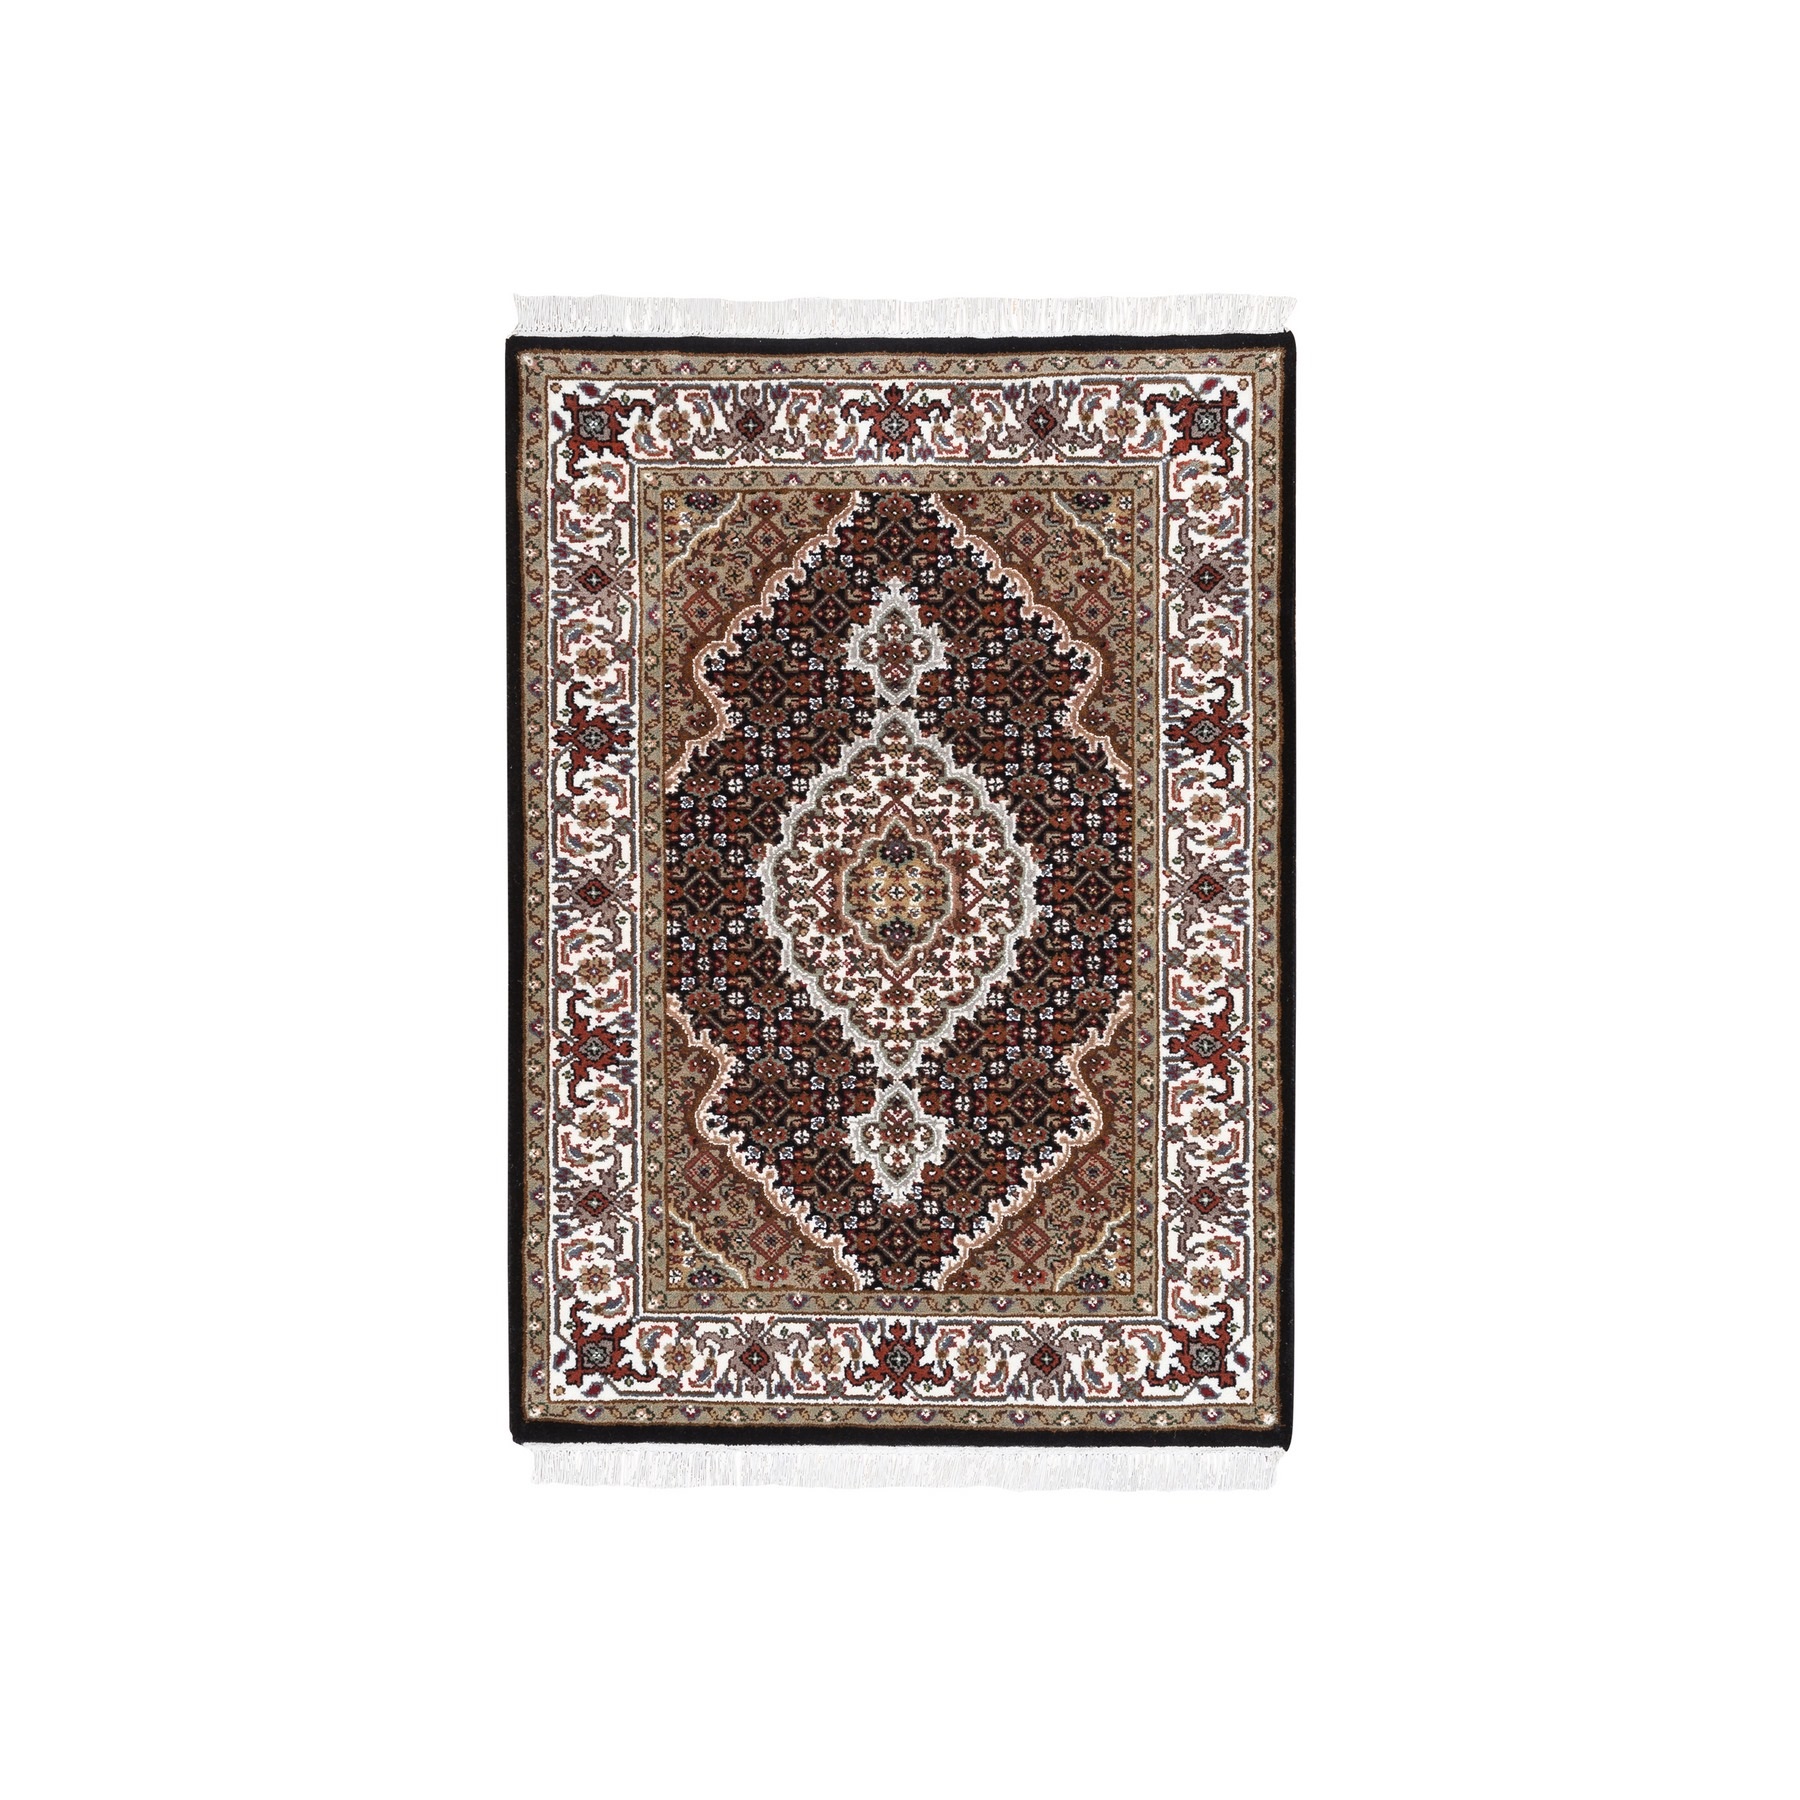 Pirniakan Collection Hand Knotted Black Rug No: 1125148